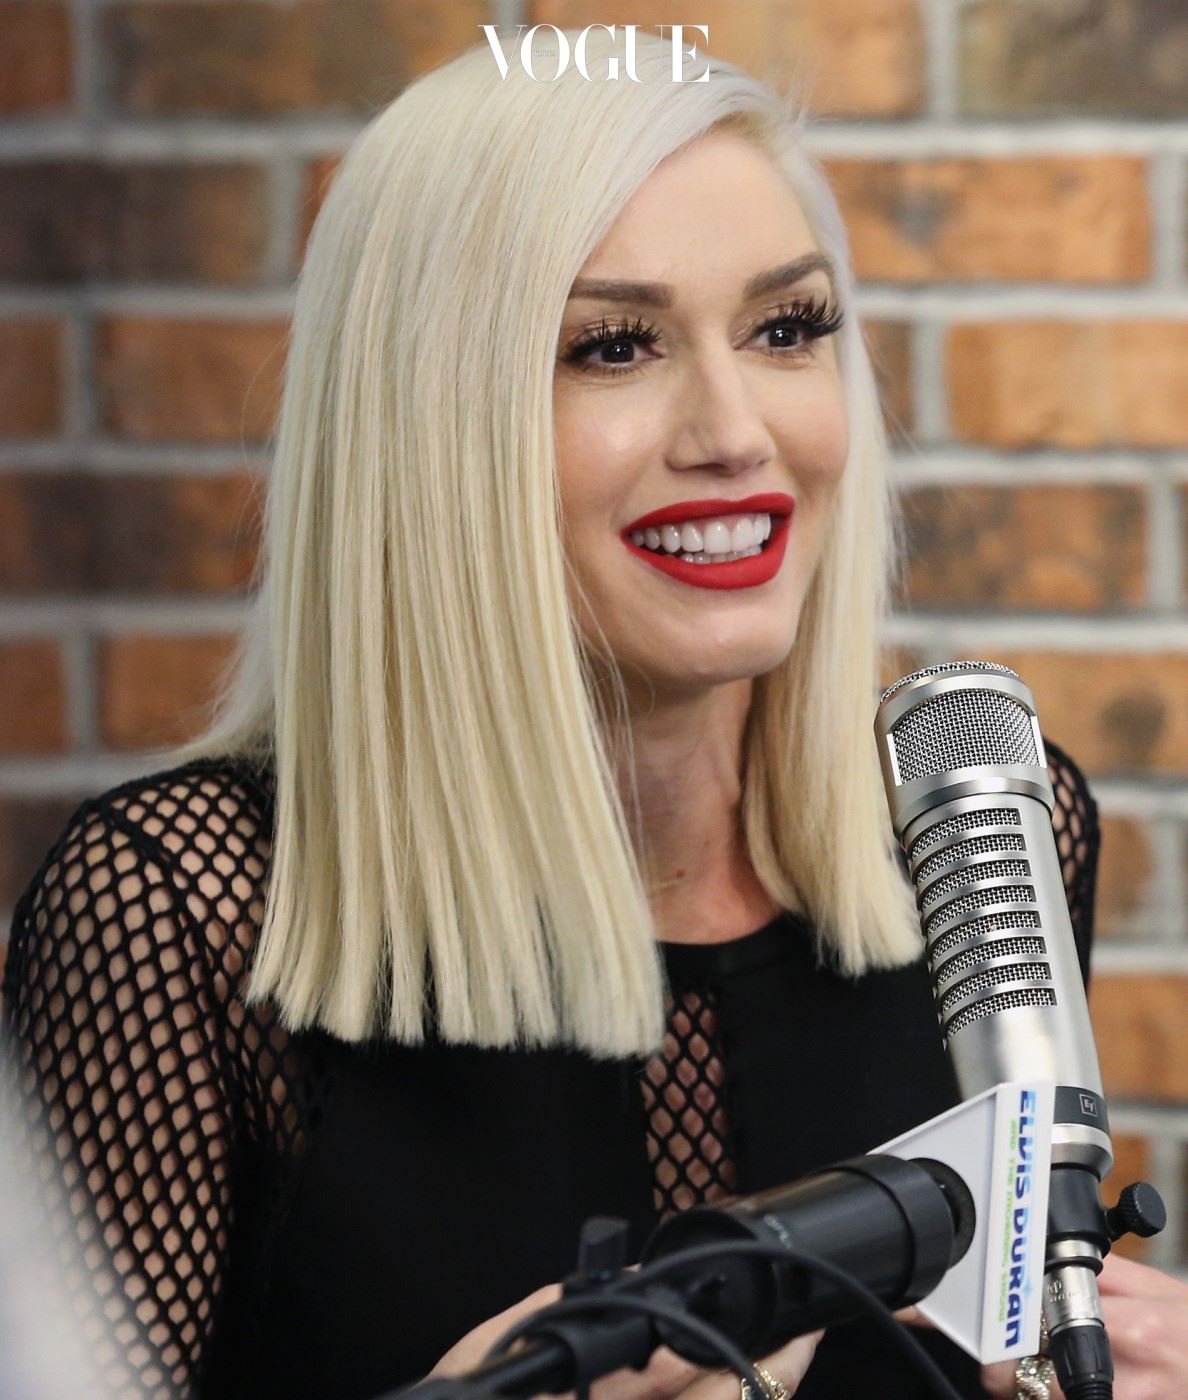 NEW YORK, NY - DECEMBER 03:  Gwen Stefani Visits "The Elvis Duran Z100 Morning Show" at Z100 Studio on December 3, 2015 in New York City.  (Photo by Robin Marchant/Getty Images)